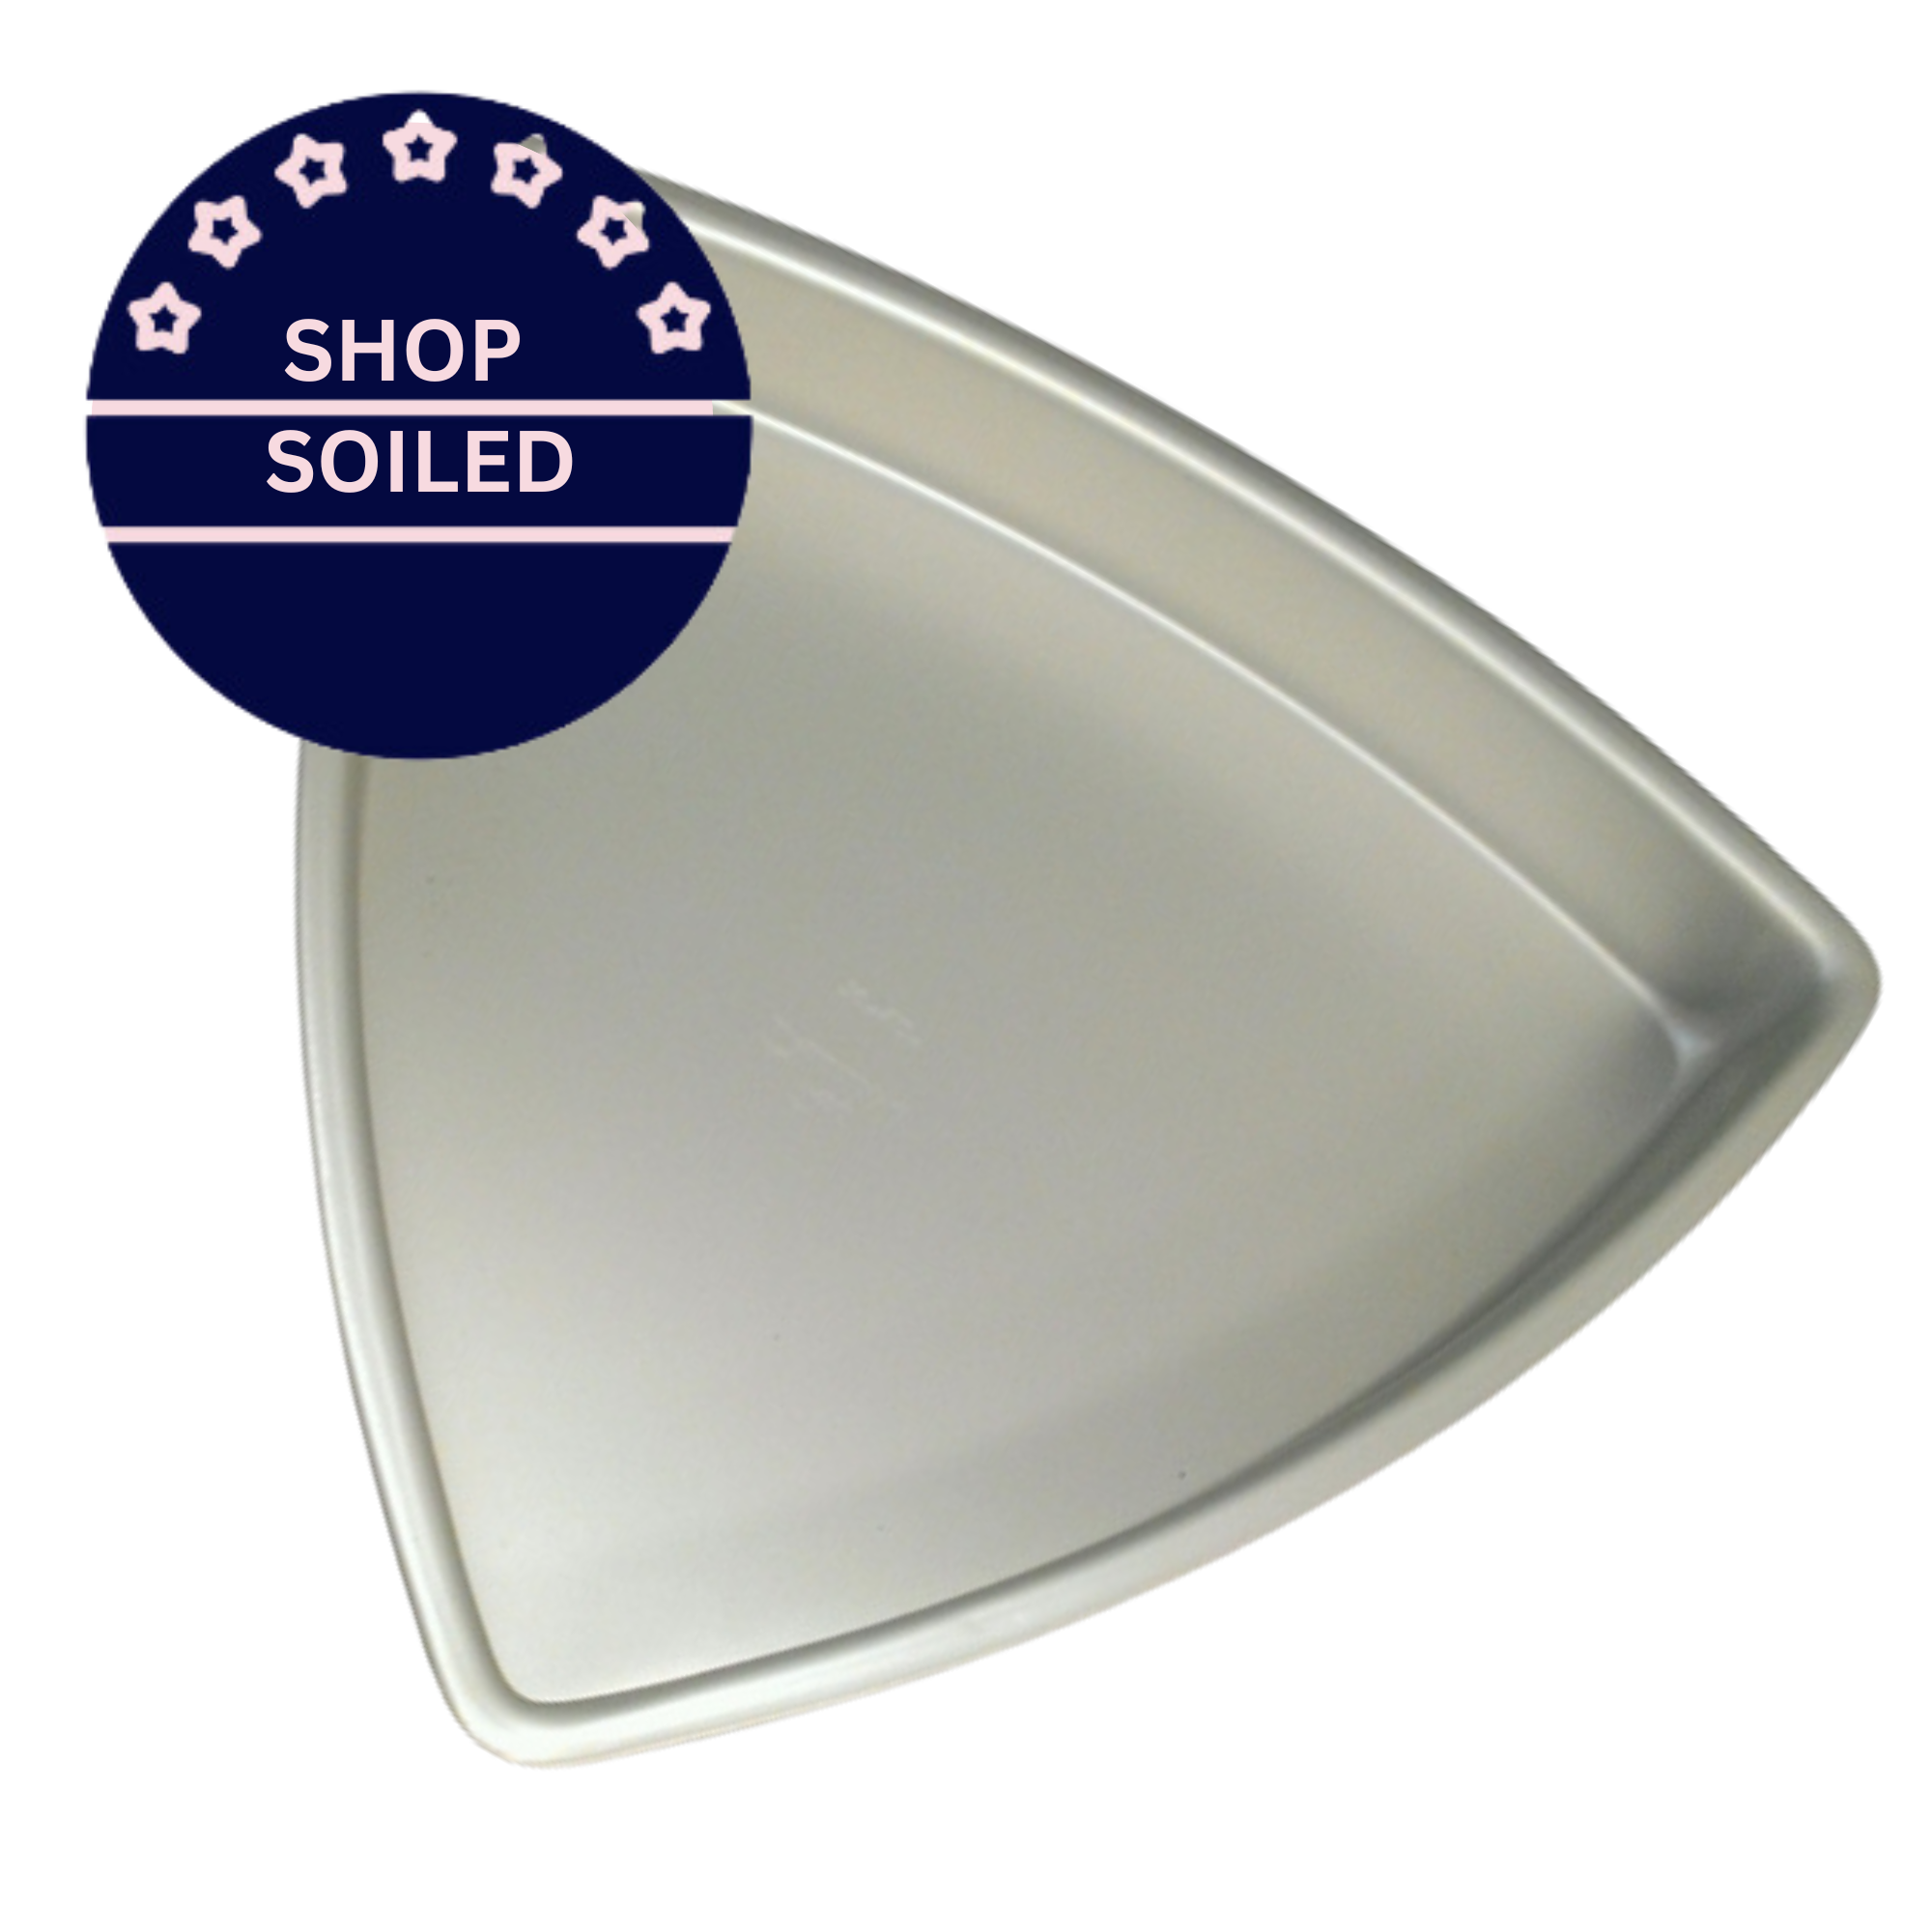 SHOP SOILED - Fat Daddio's from Silverwood Professional Silver Anodised Baking Tin Pan - Concave Triangle - 12" x 3"